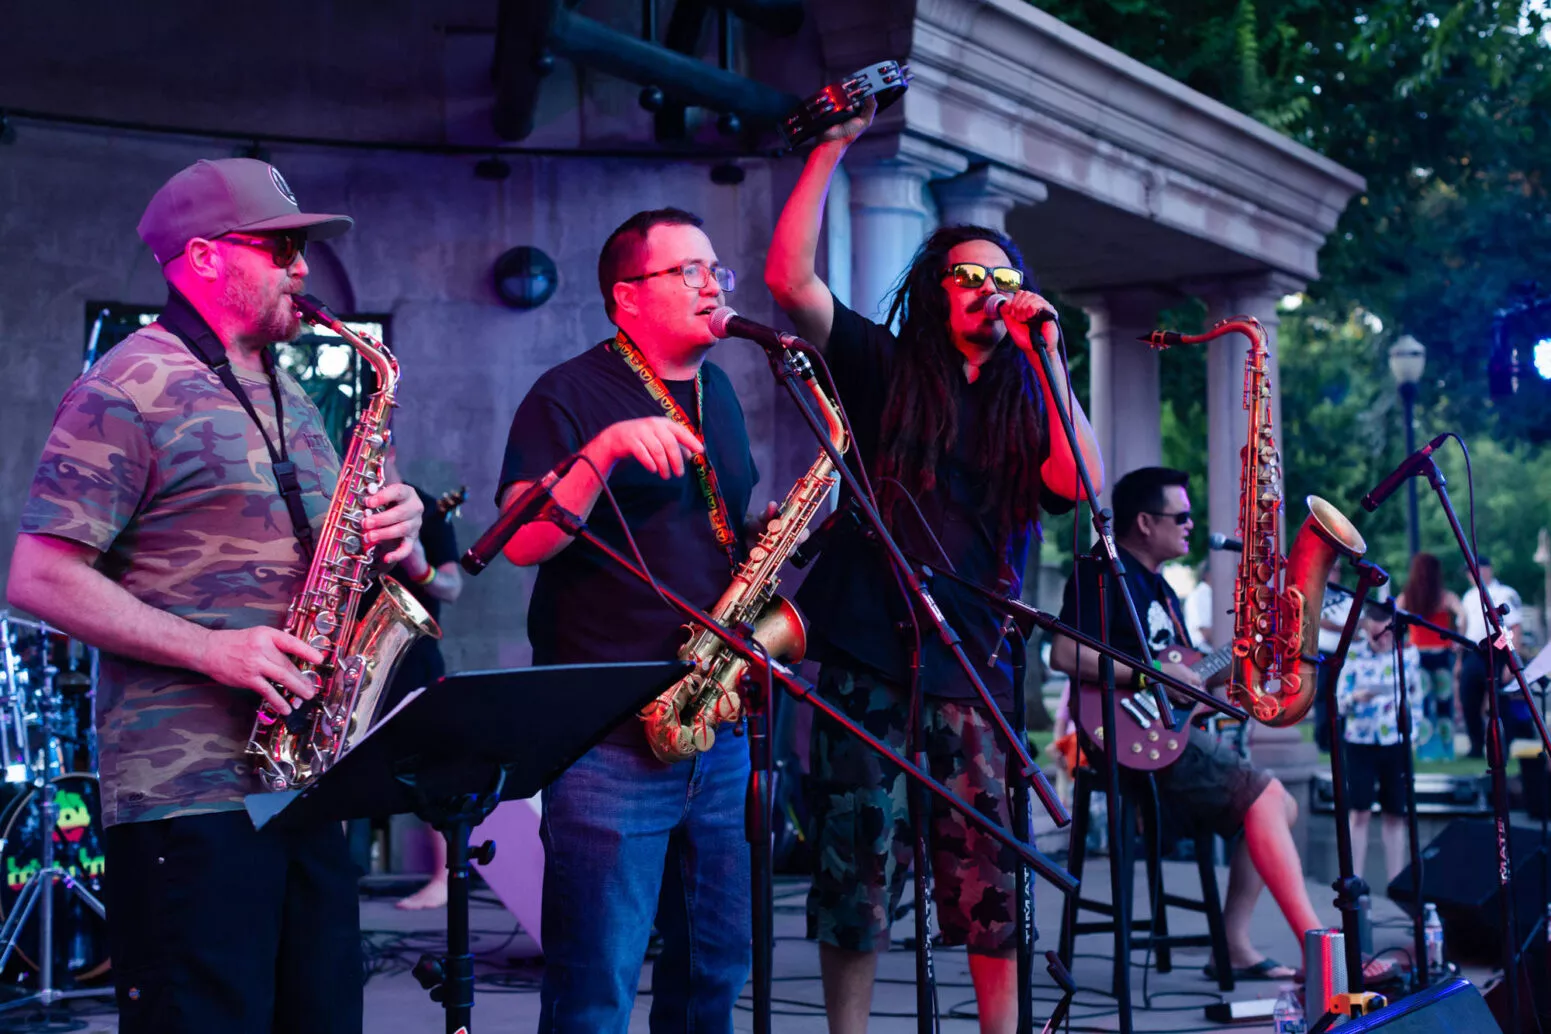 Greg Gardea sings as the horn section hits their note when Triple Tree performs in Plaza Park, Chico, CA at Friday Night Concerts, 2021.